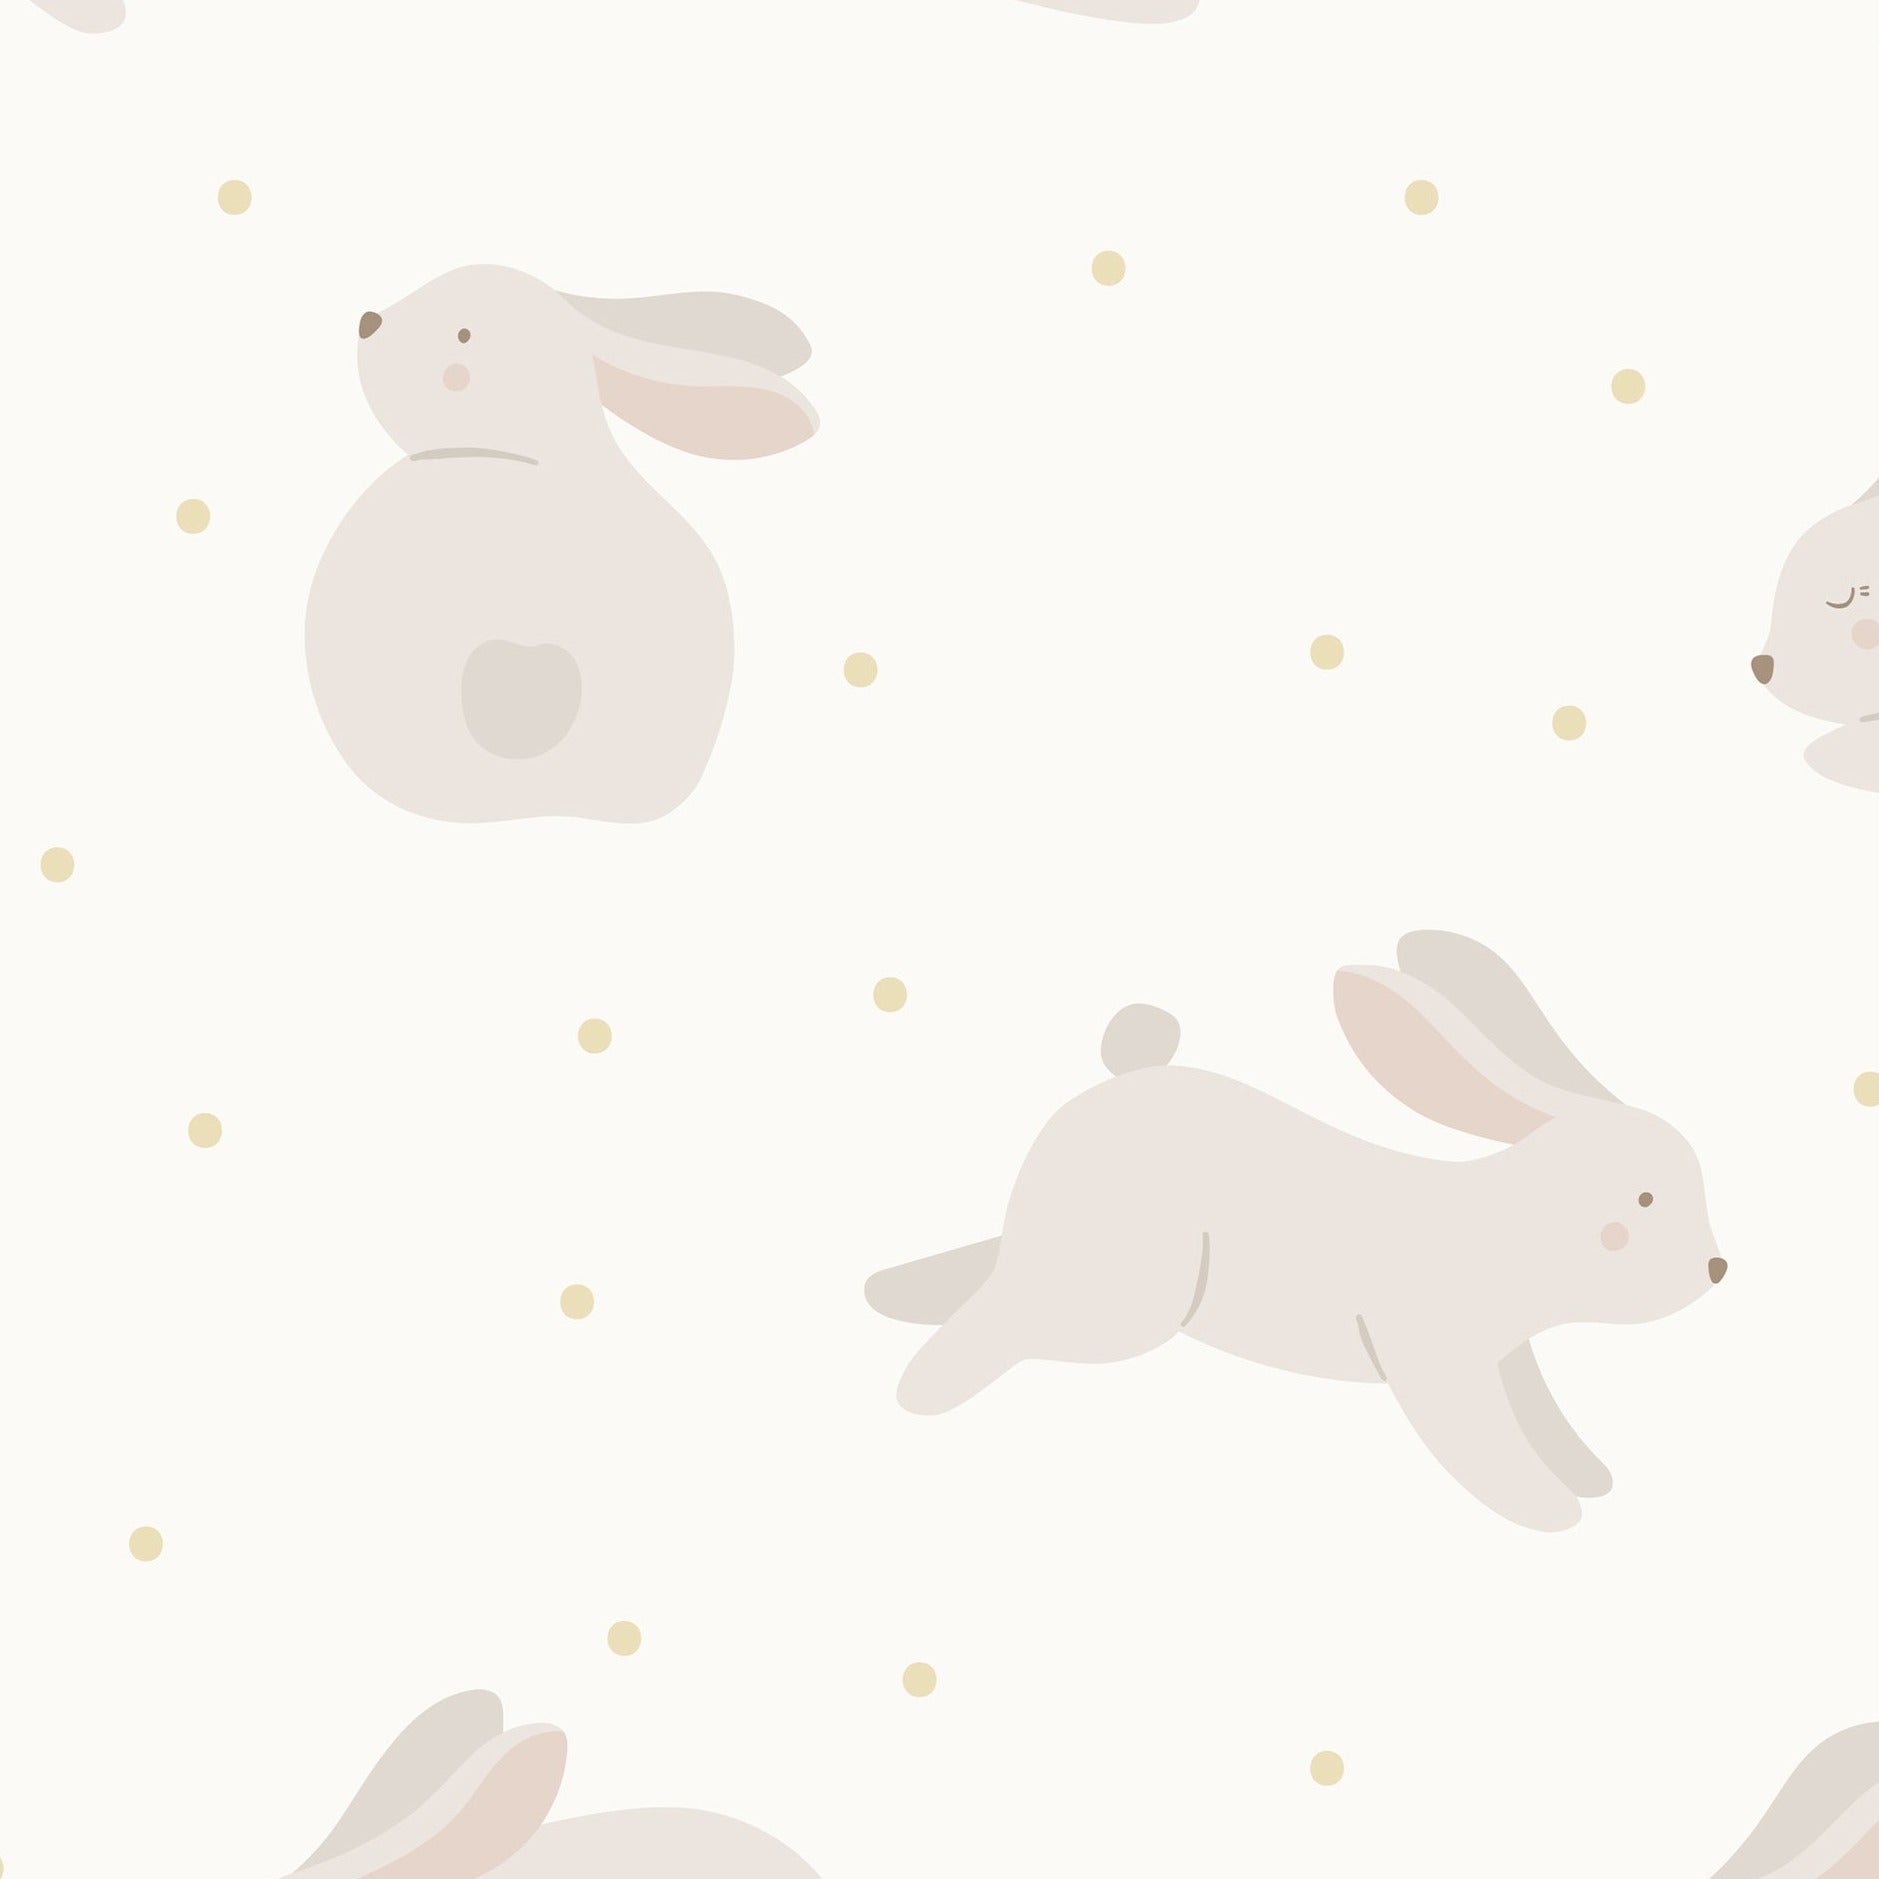 Soft and serene 'Nursery Bunny Wallpaper' featuring gentle illustrations of beige bunnies in various poses with golden dots on a light background, creating a calming atmosphere perfect for a baby's nursery.